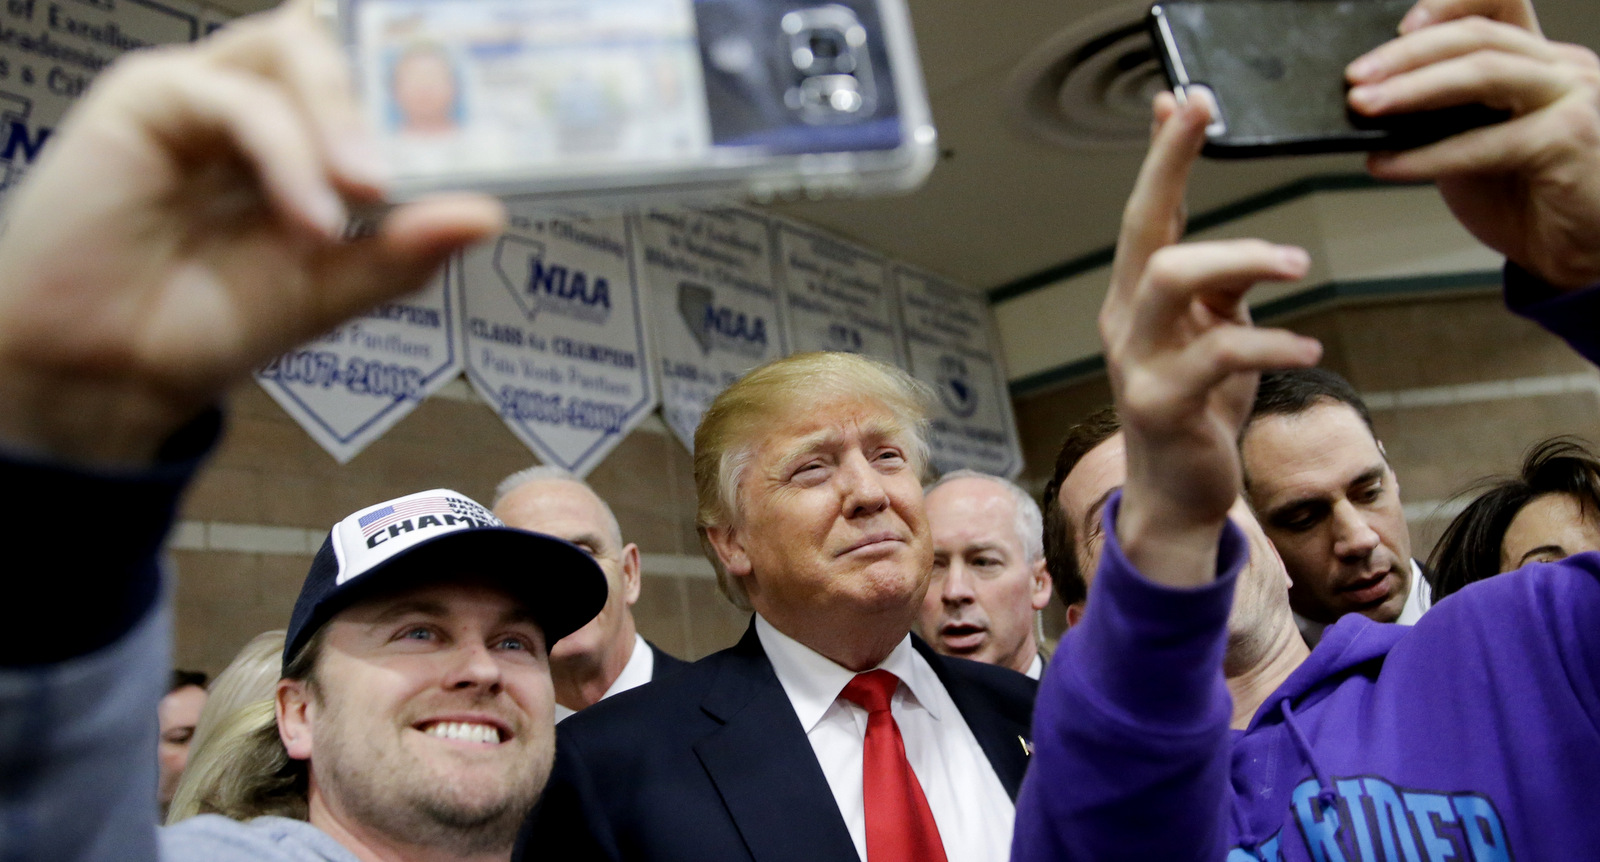 Republican presidential candidate Donald Trump, middle, takes a picture with supporters at a caucus site, Tuesday, Feb. 23, 2016, in Las Vegas. (AP Photo/Jae C. Hong)